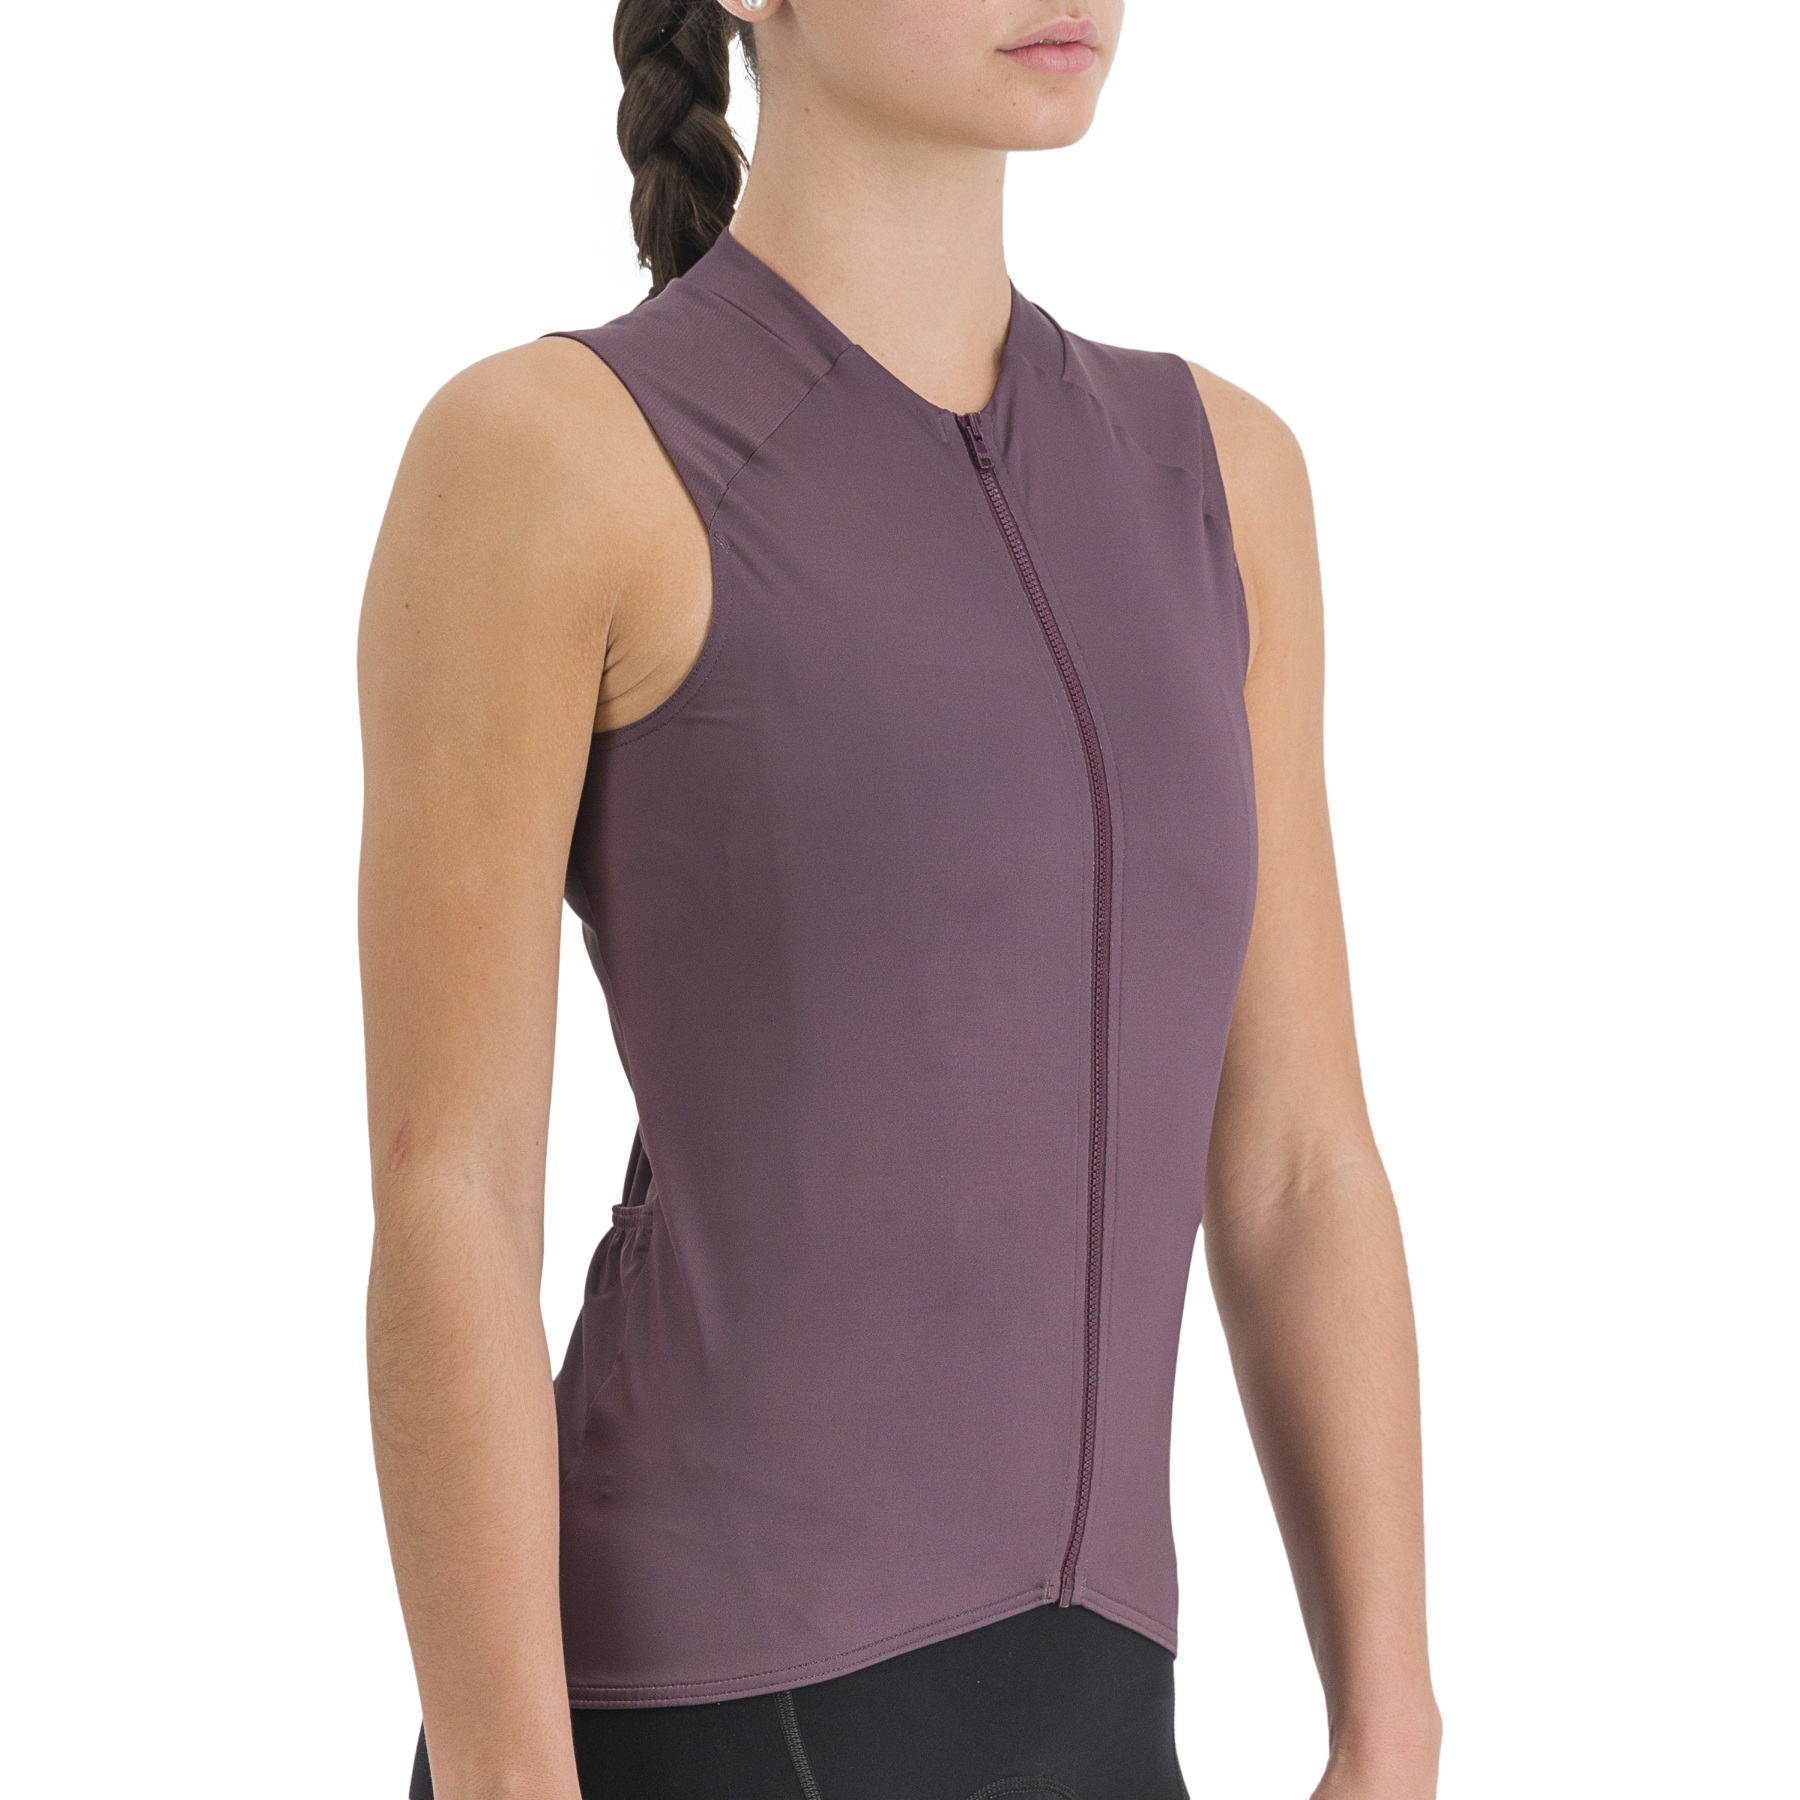 Picture of Sportful Matchy Women Sleeveless Jersey - 623 Huckleberry